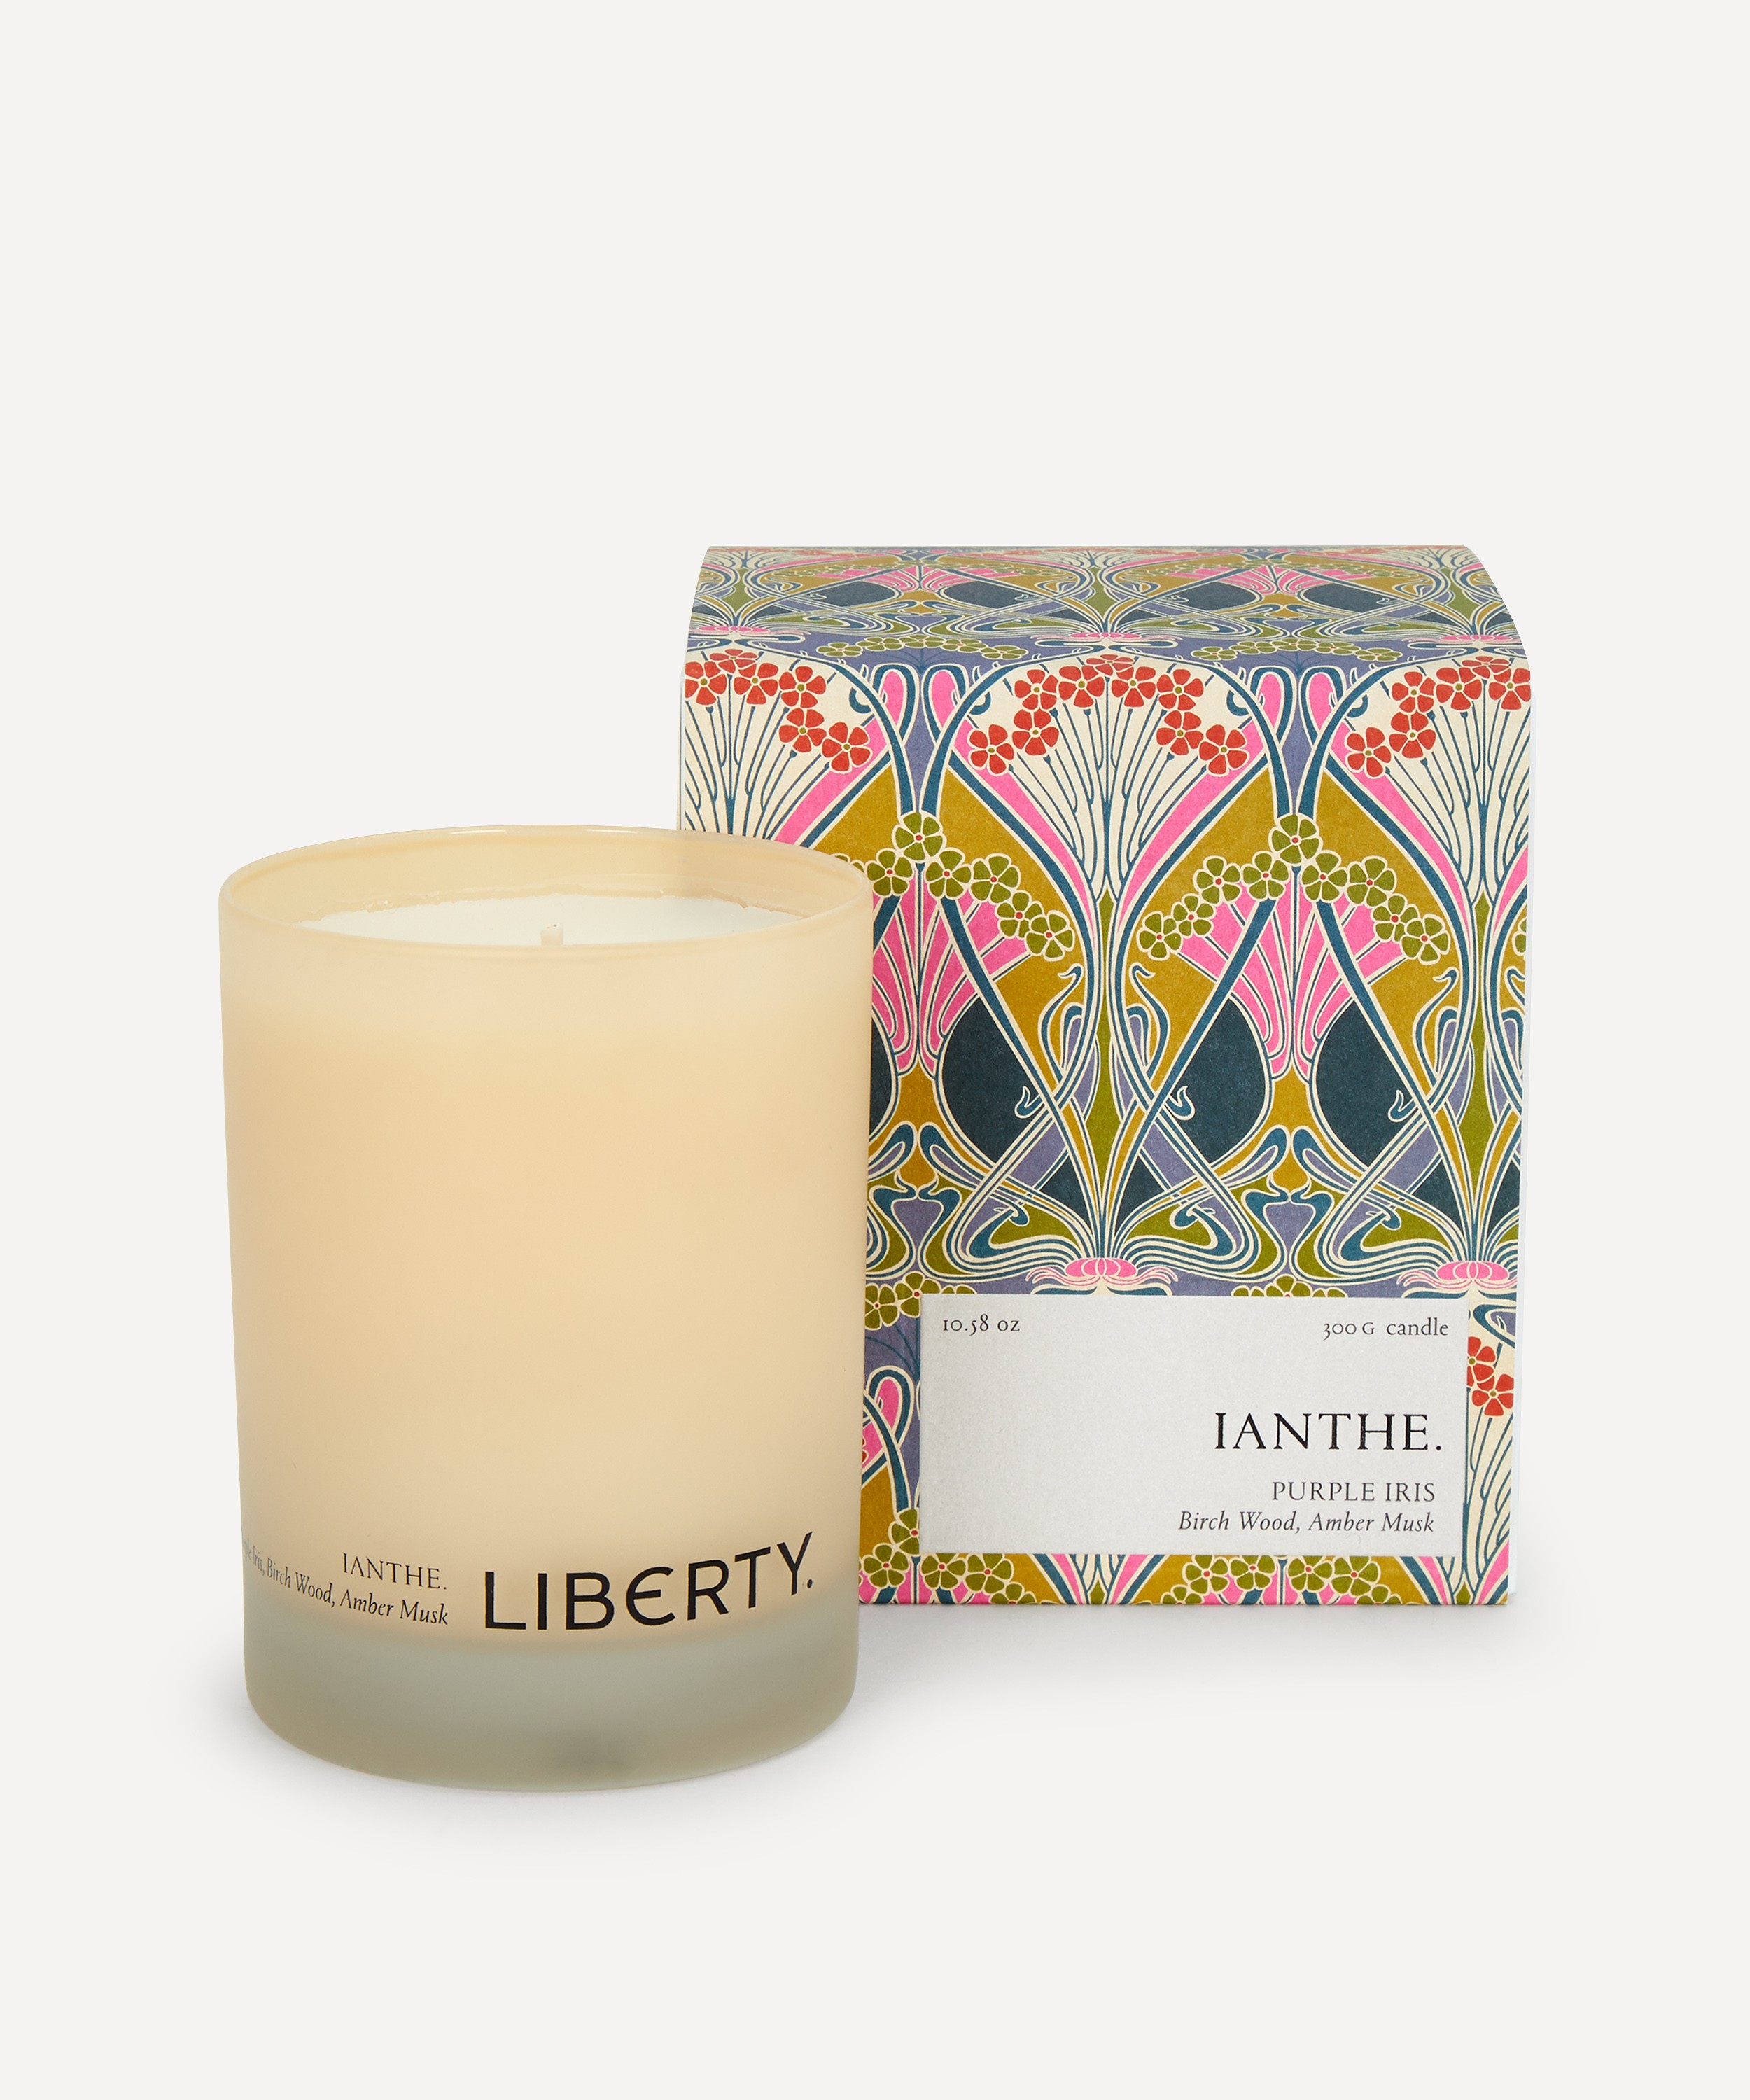 Liberty Ianthe Scented Candle 300g